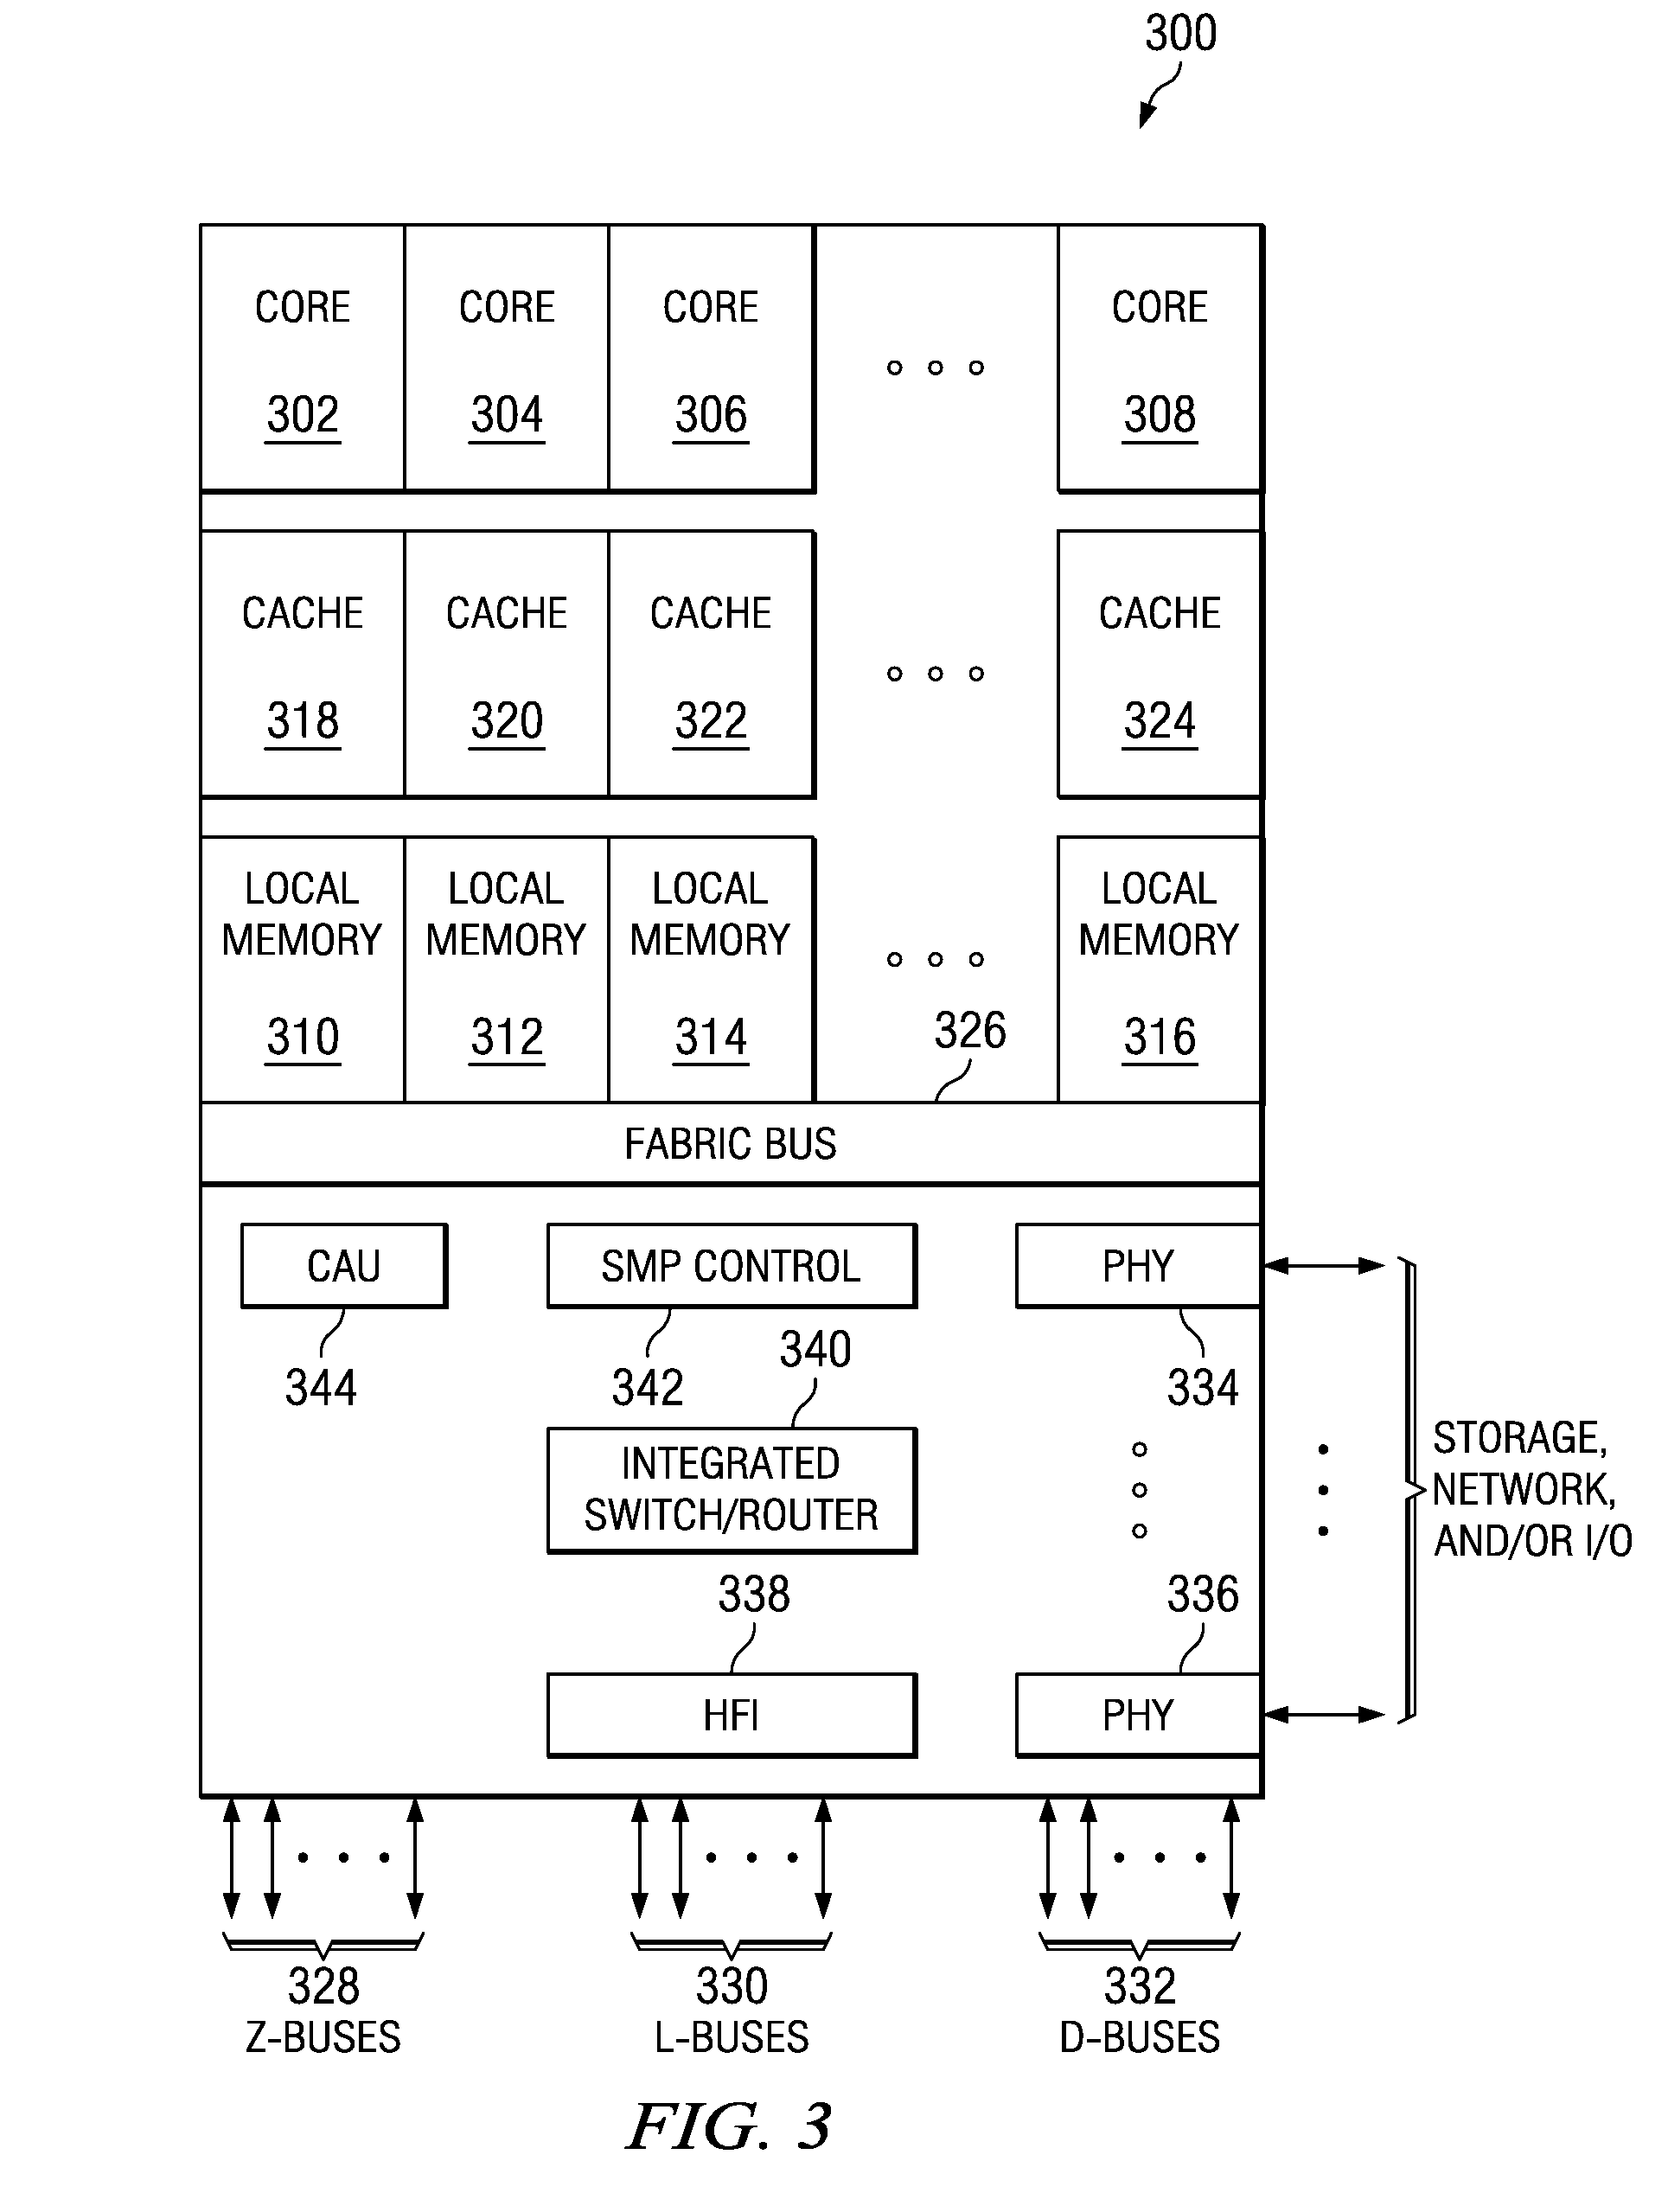 Direct/indirect transmission of information using a multi-tiered full-graph interconnect architecture